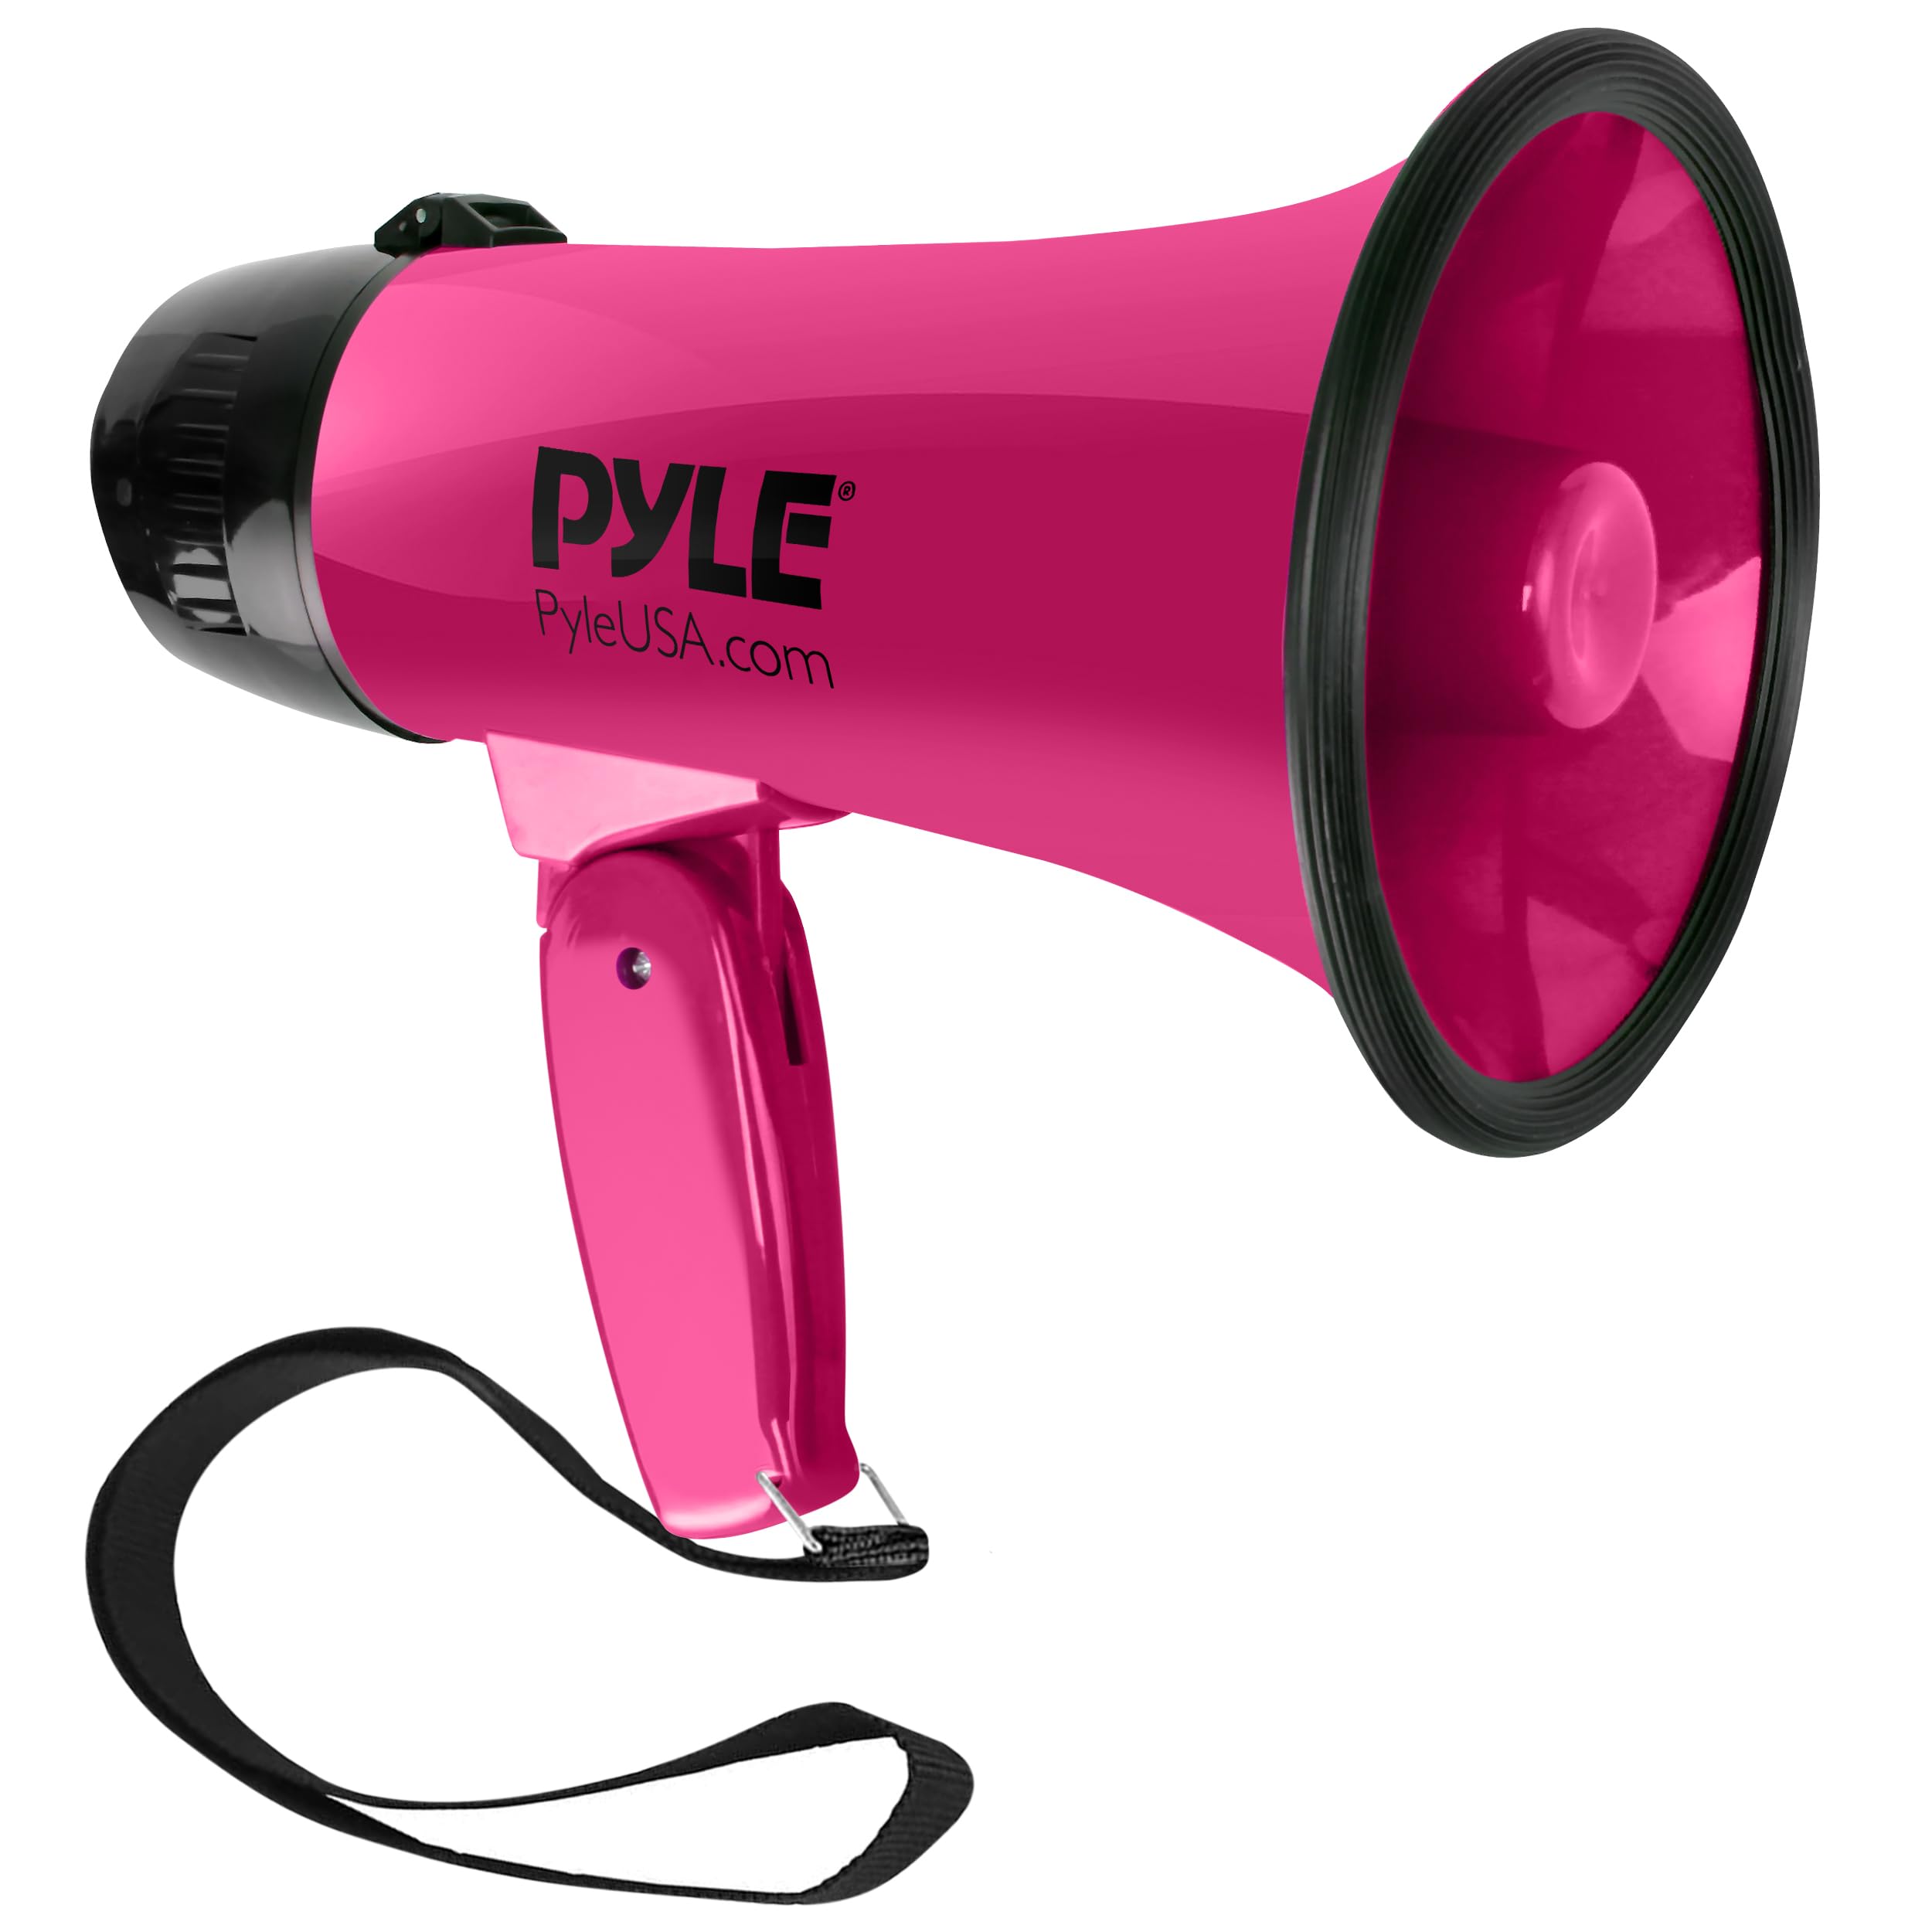 PYLE-PRO Portable Megaphone Speaker Siren Bullhorn - Compact and Battery Operated with 20 Watt Power, Microphone, 2 Modes, PA Sound and Foldable Handle for Cheerleading and Police Use PMP24PK (Pink)